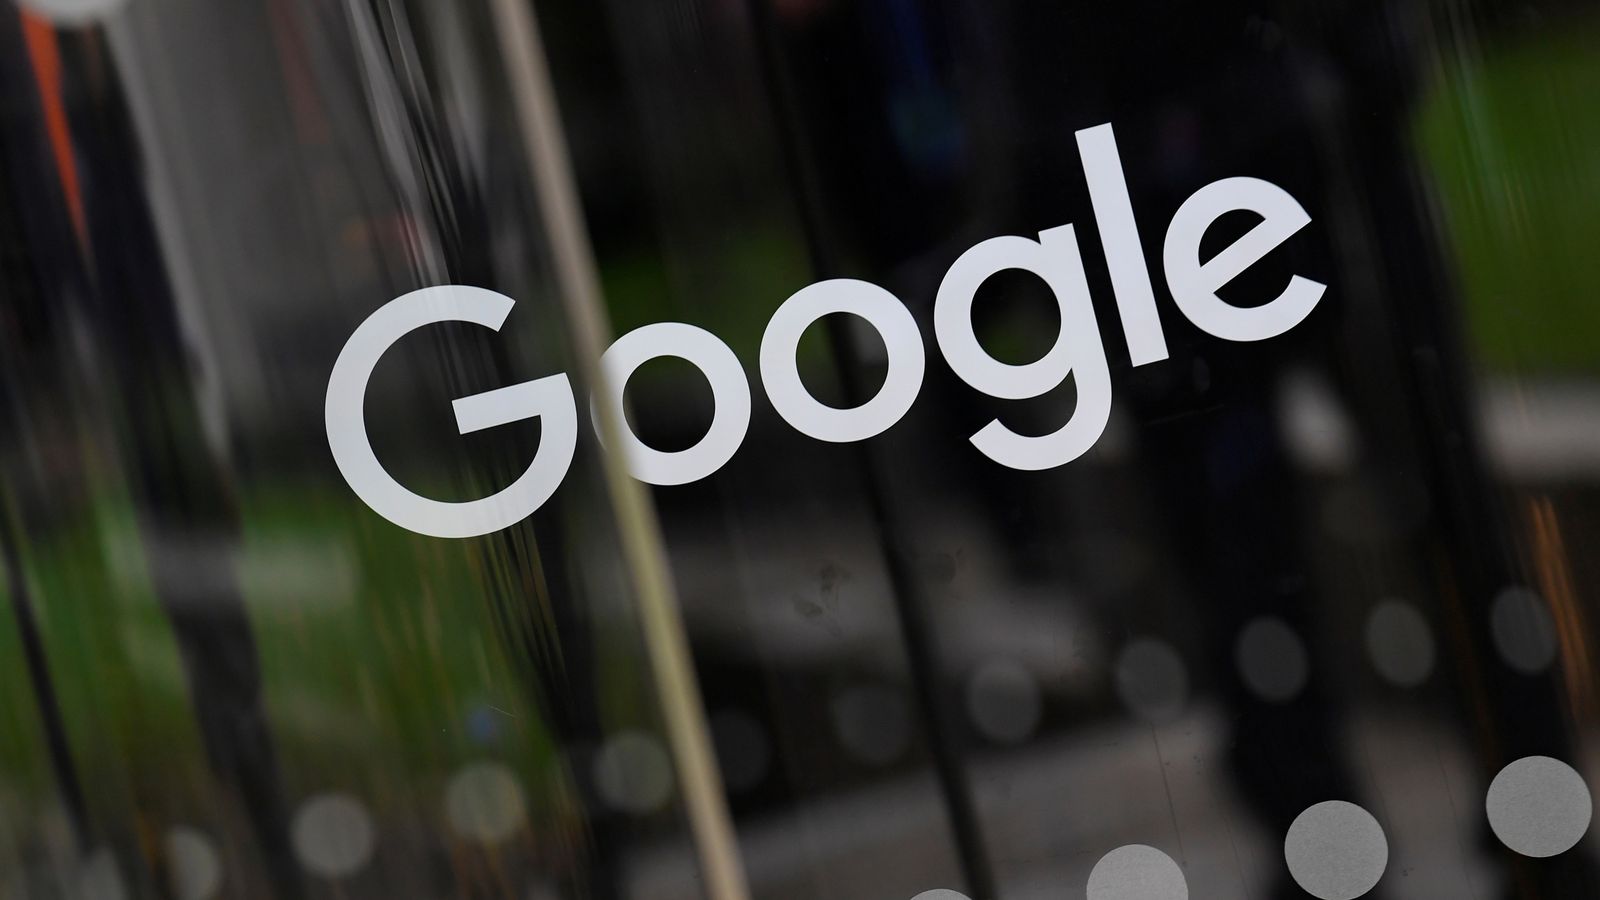 Google job fears in UK and Ireland as parent firm Alphabet slashes 12,000 staff globally